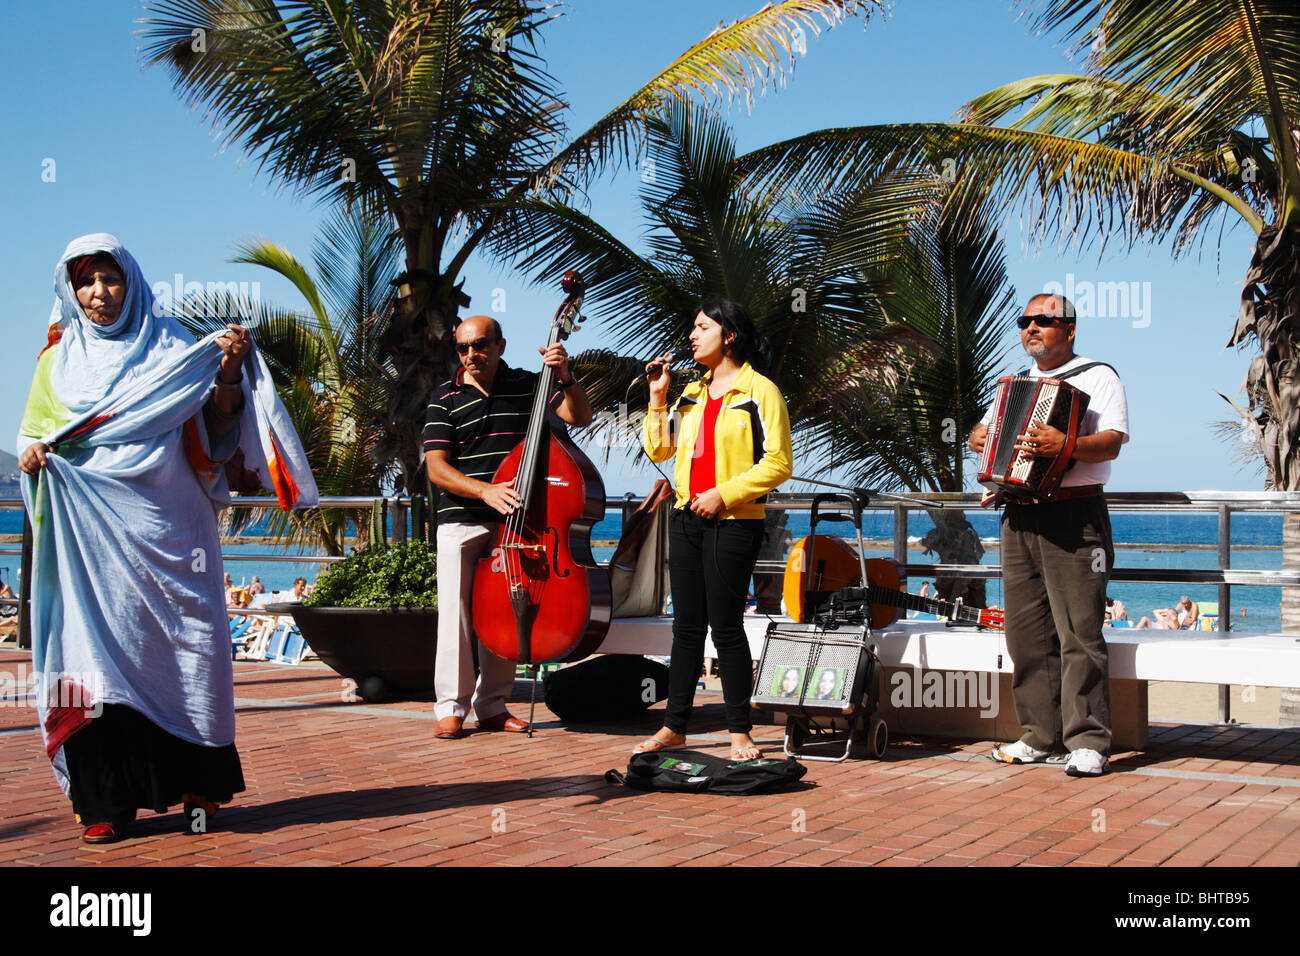 Group of Spanish gypsy musicians busking near Las Canteras beach in Las Palmas, Gran Canaria. North African woman walking past. Stock Photo